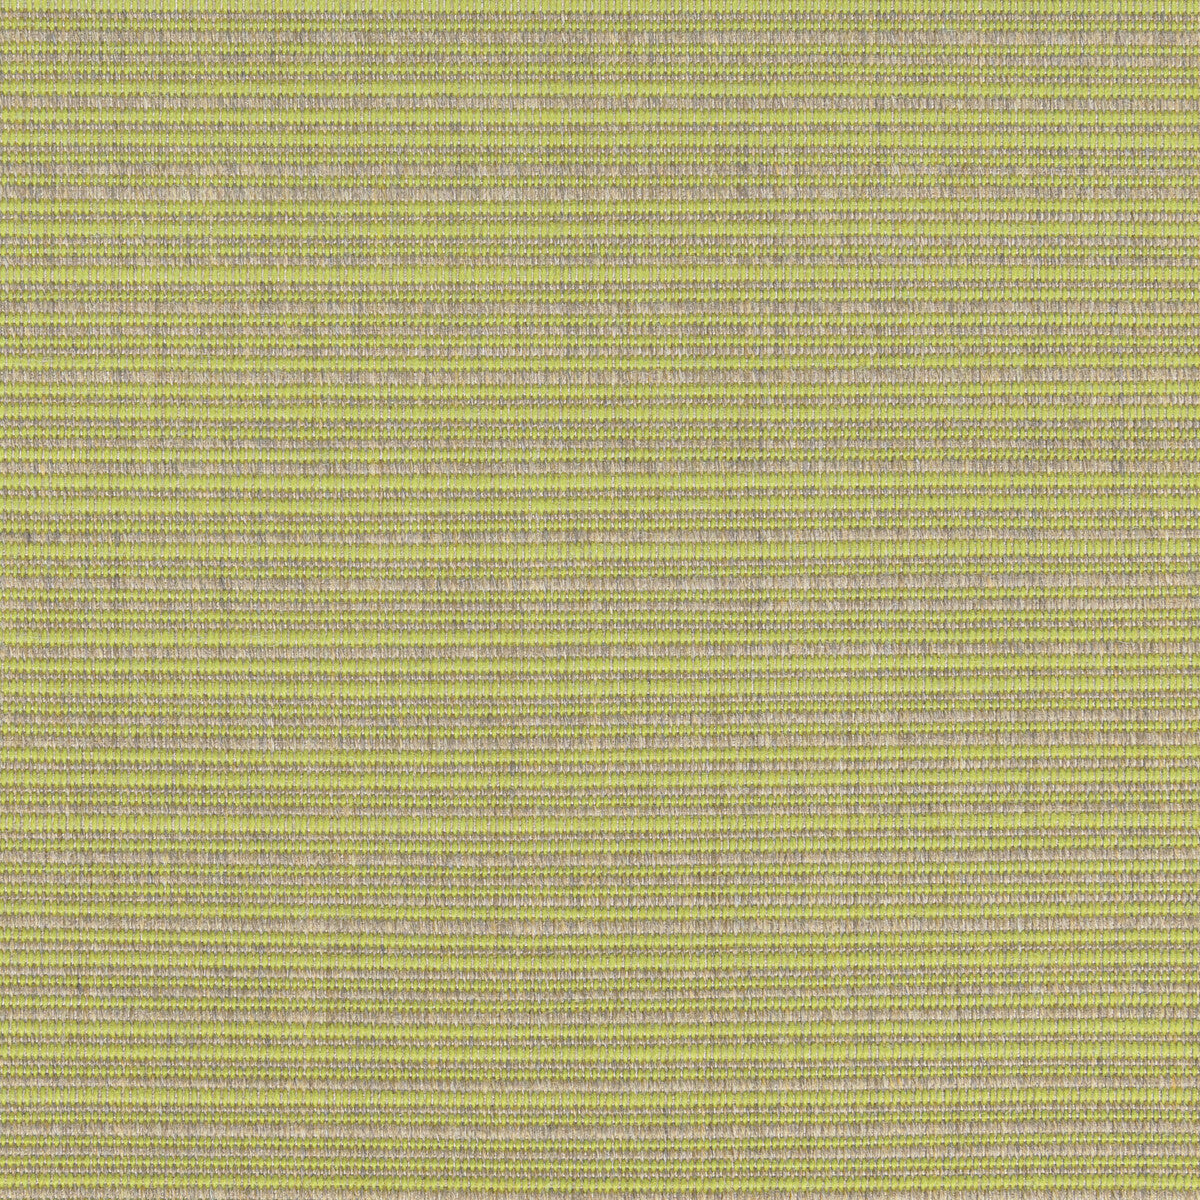 Kravet Basics fabric in 36842-23 color - pattern 36842.23.0 - by Kravet Basics in the Indoor / Outdoor collection